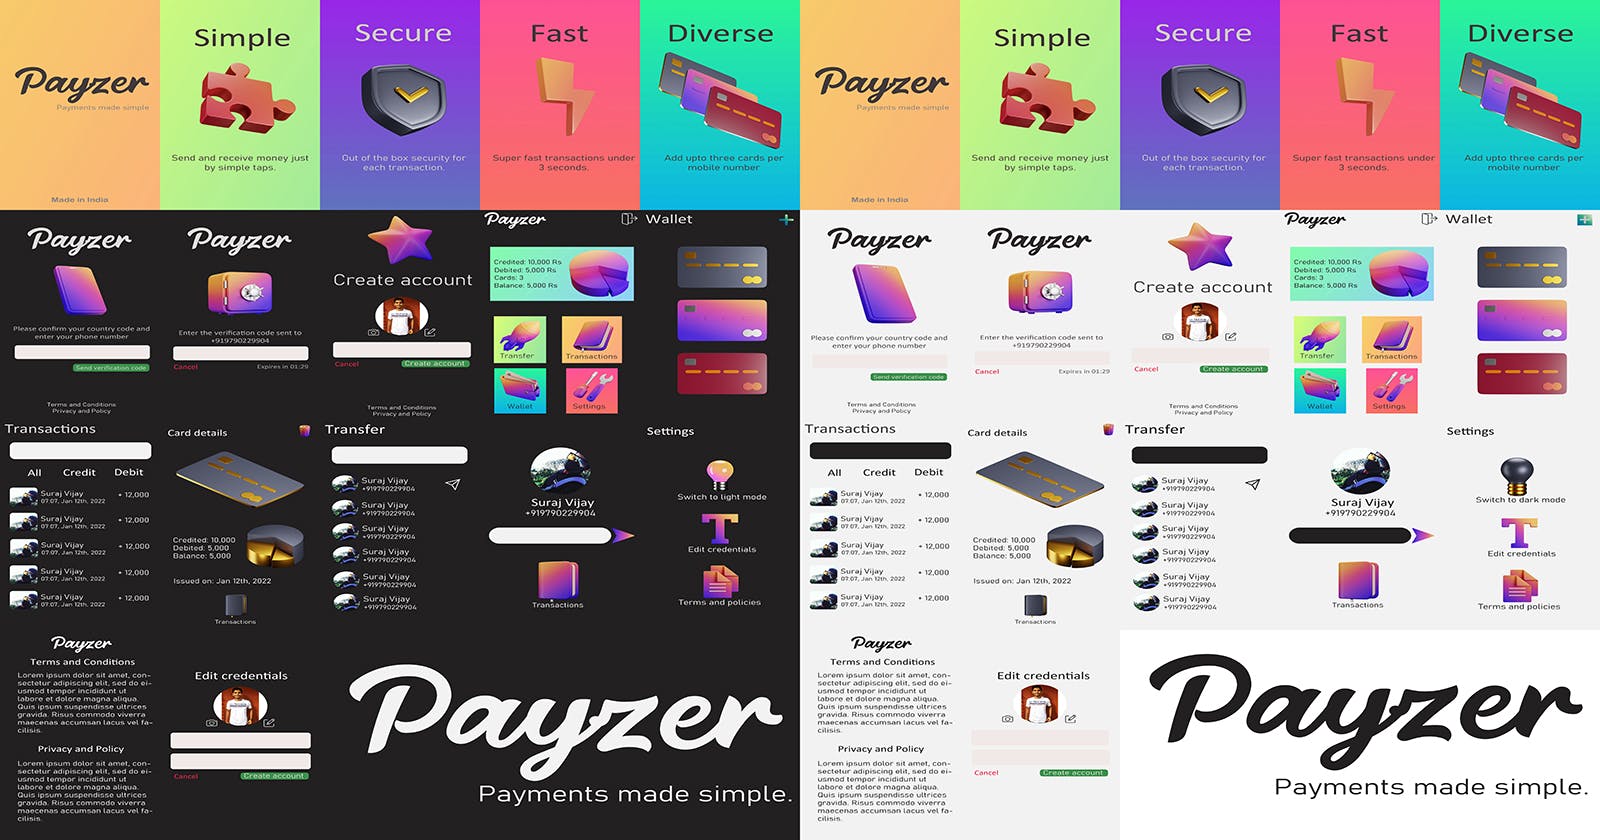 Everything about Project Payzer